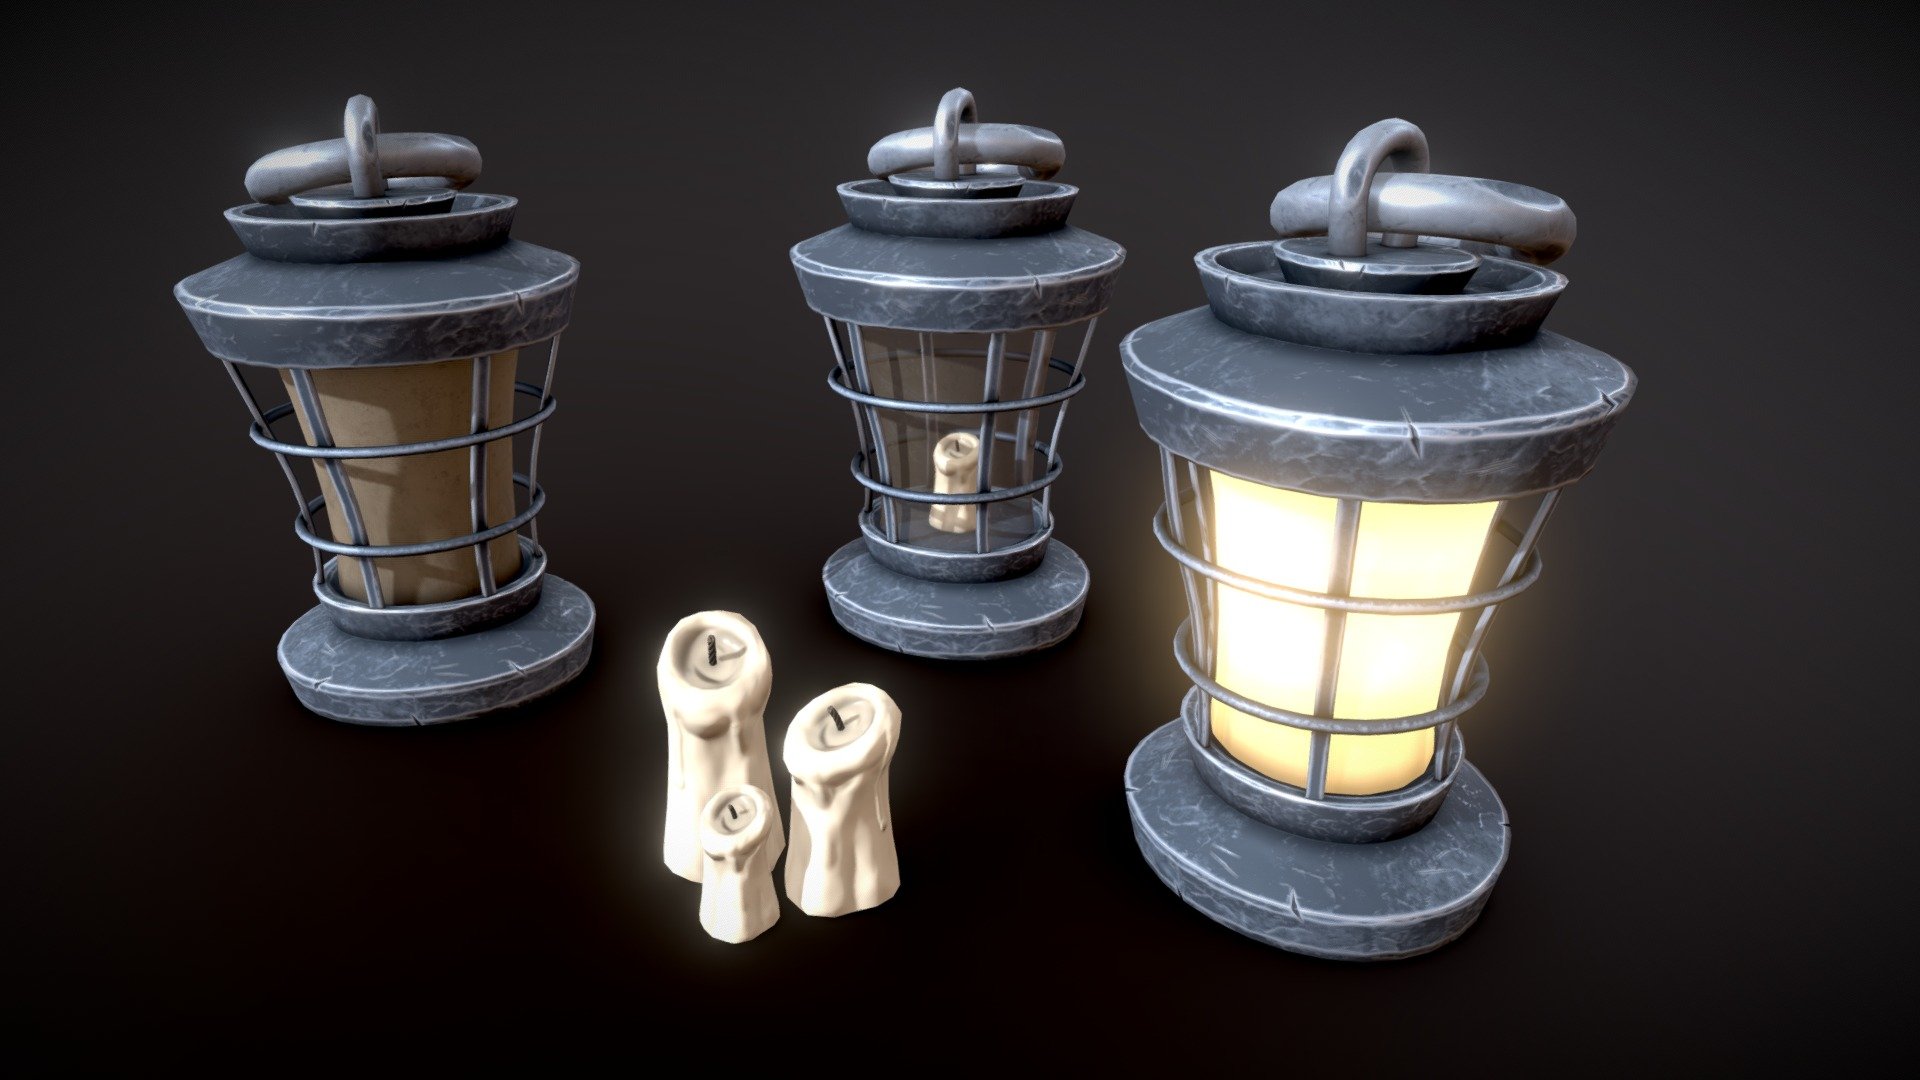 tylized Oil Lamp with High Quality PBR Textures.




3657 Tris (1904 Vertices) 

Blend, FBX, UnityPackages (2019.4, Built-In/URP/HDRP) formats. 

Materials and textures included. 

Metallic/Roughness PBR, Unity Built-In/URP/HDRP and UE4 Texture Sets 2048px PNG Textures.

Model by @Bek, Idea and Art Direction by Ivan Vostrikov 3d model